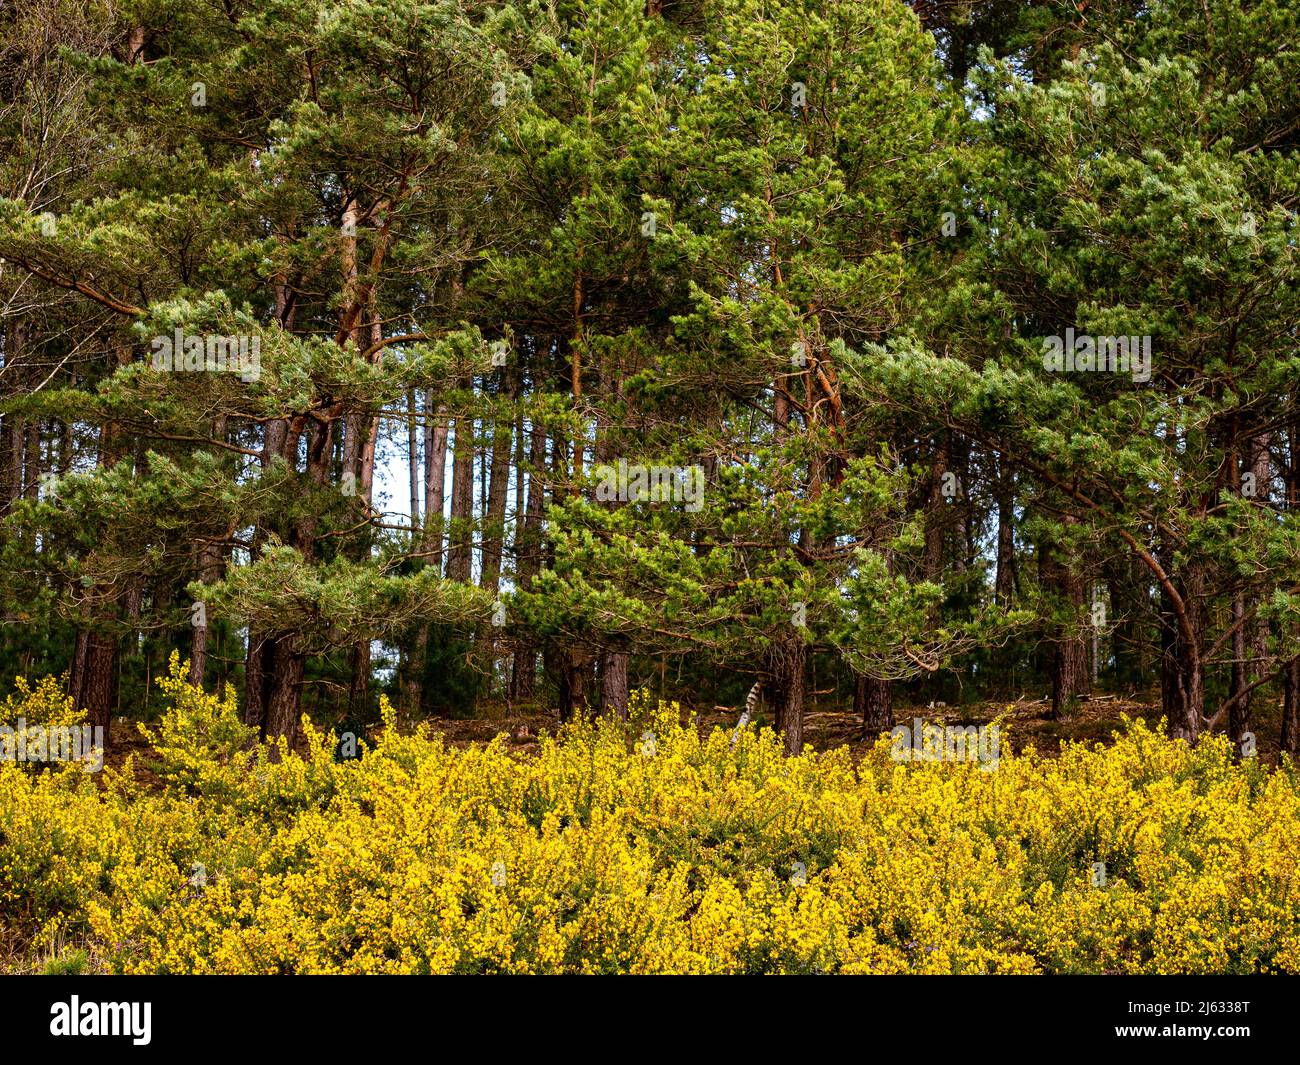 Gorse bushes in front of a pine group, New Forest National Park, Hampshire, England. Stock Photo